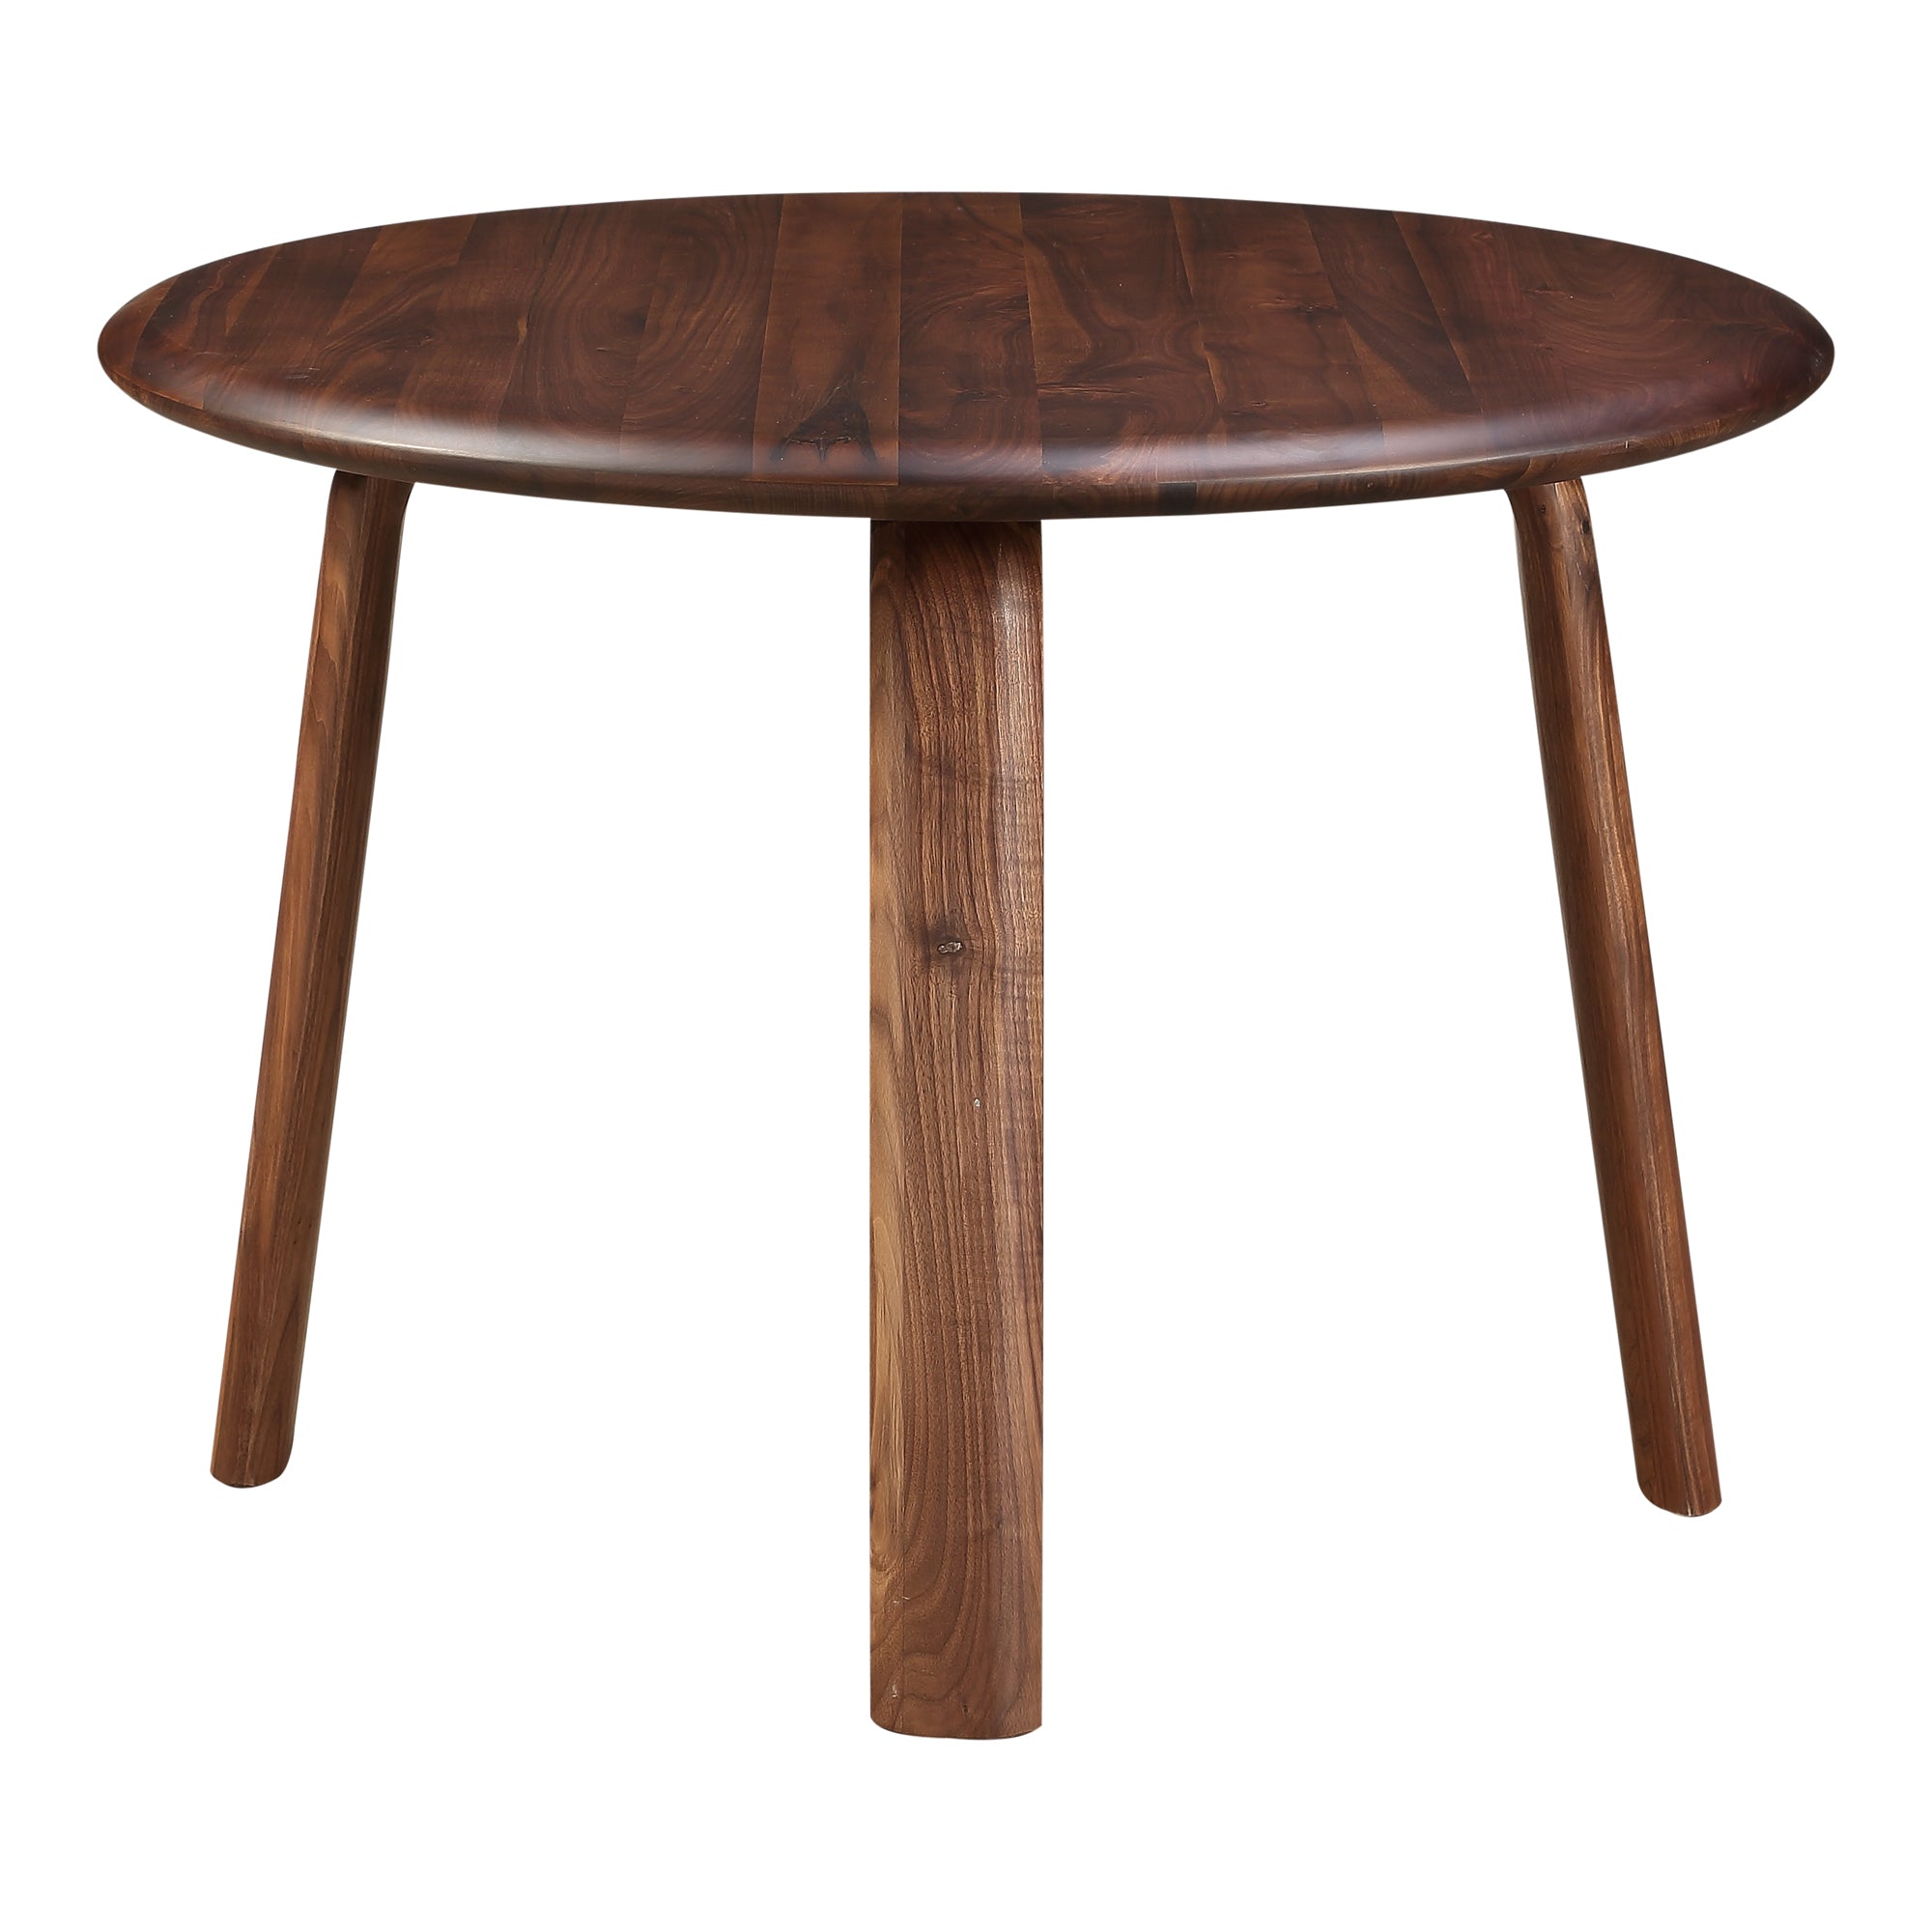 MOES-Malibu Round Dining Table-Dining Tables-MODTEMPO